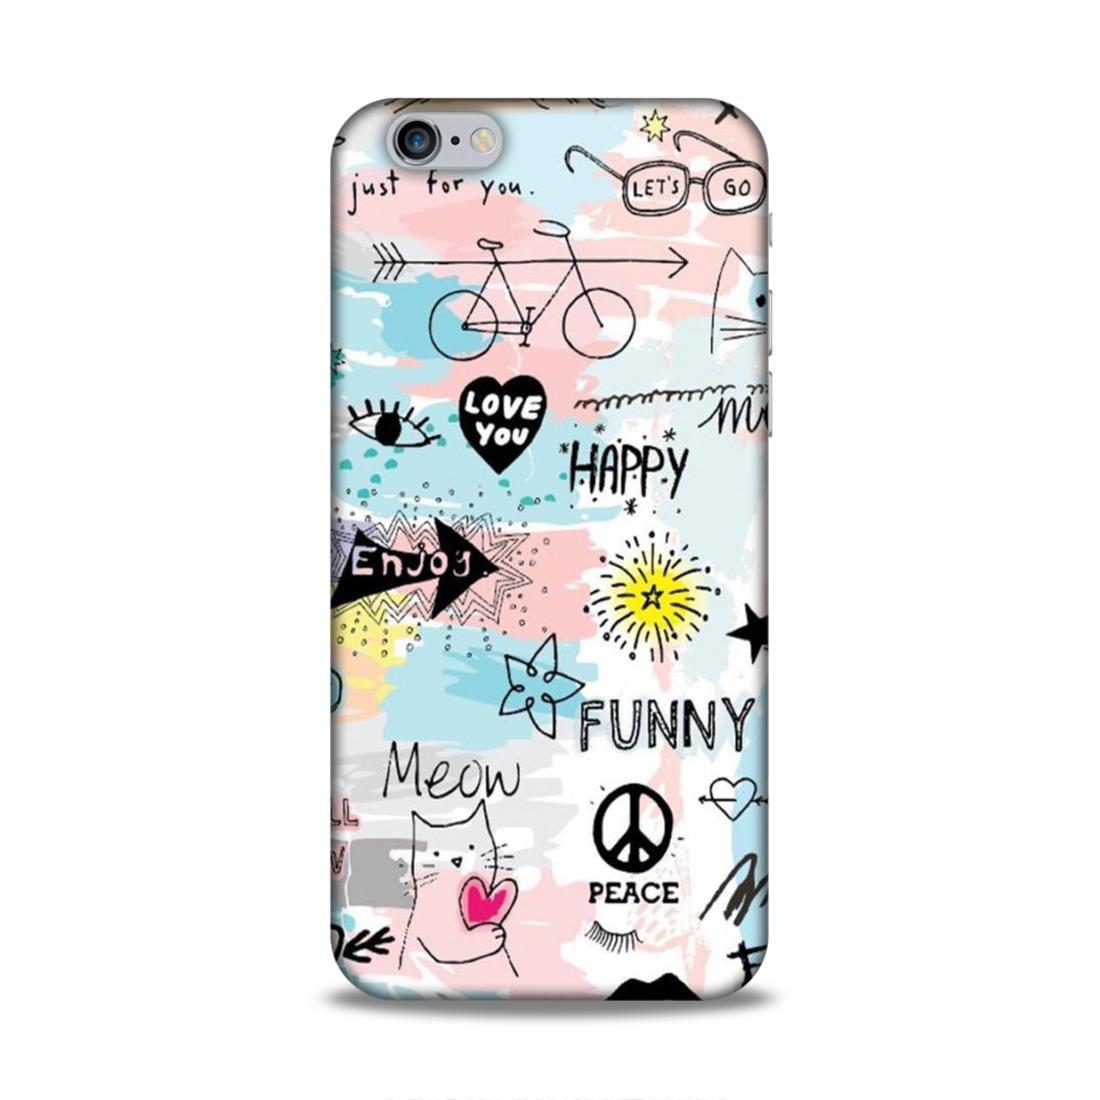 Cute Funky Happy iPhone 6s Mobile Cover Case